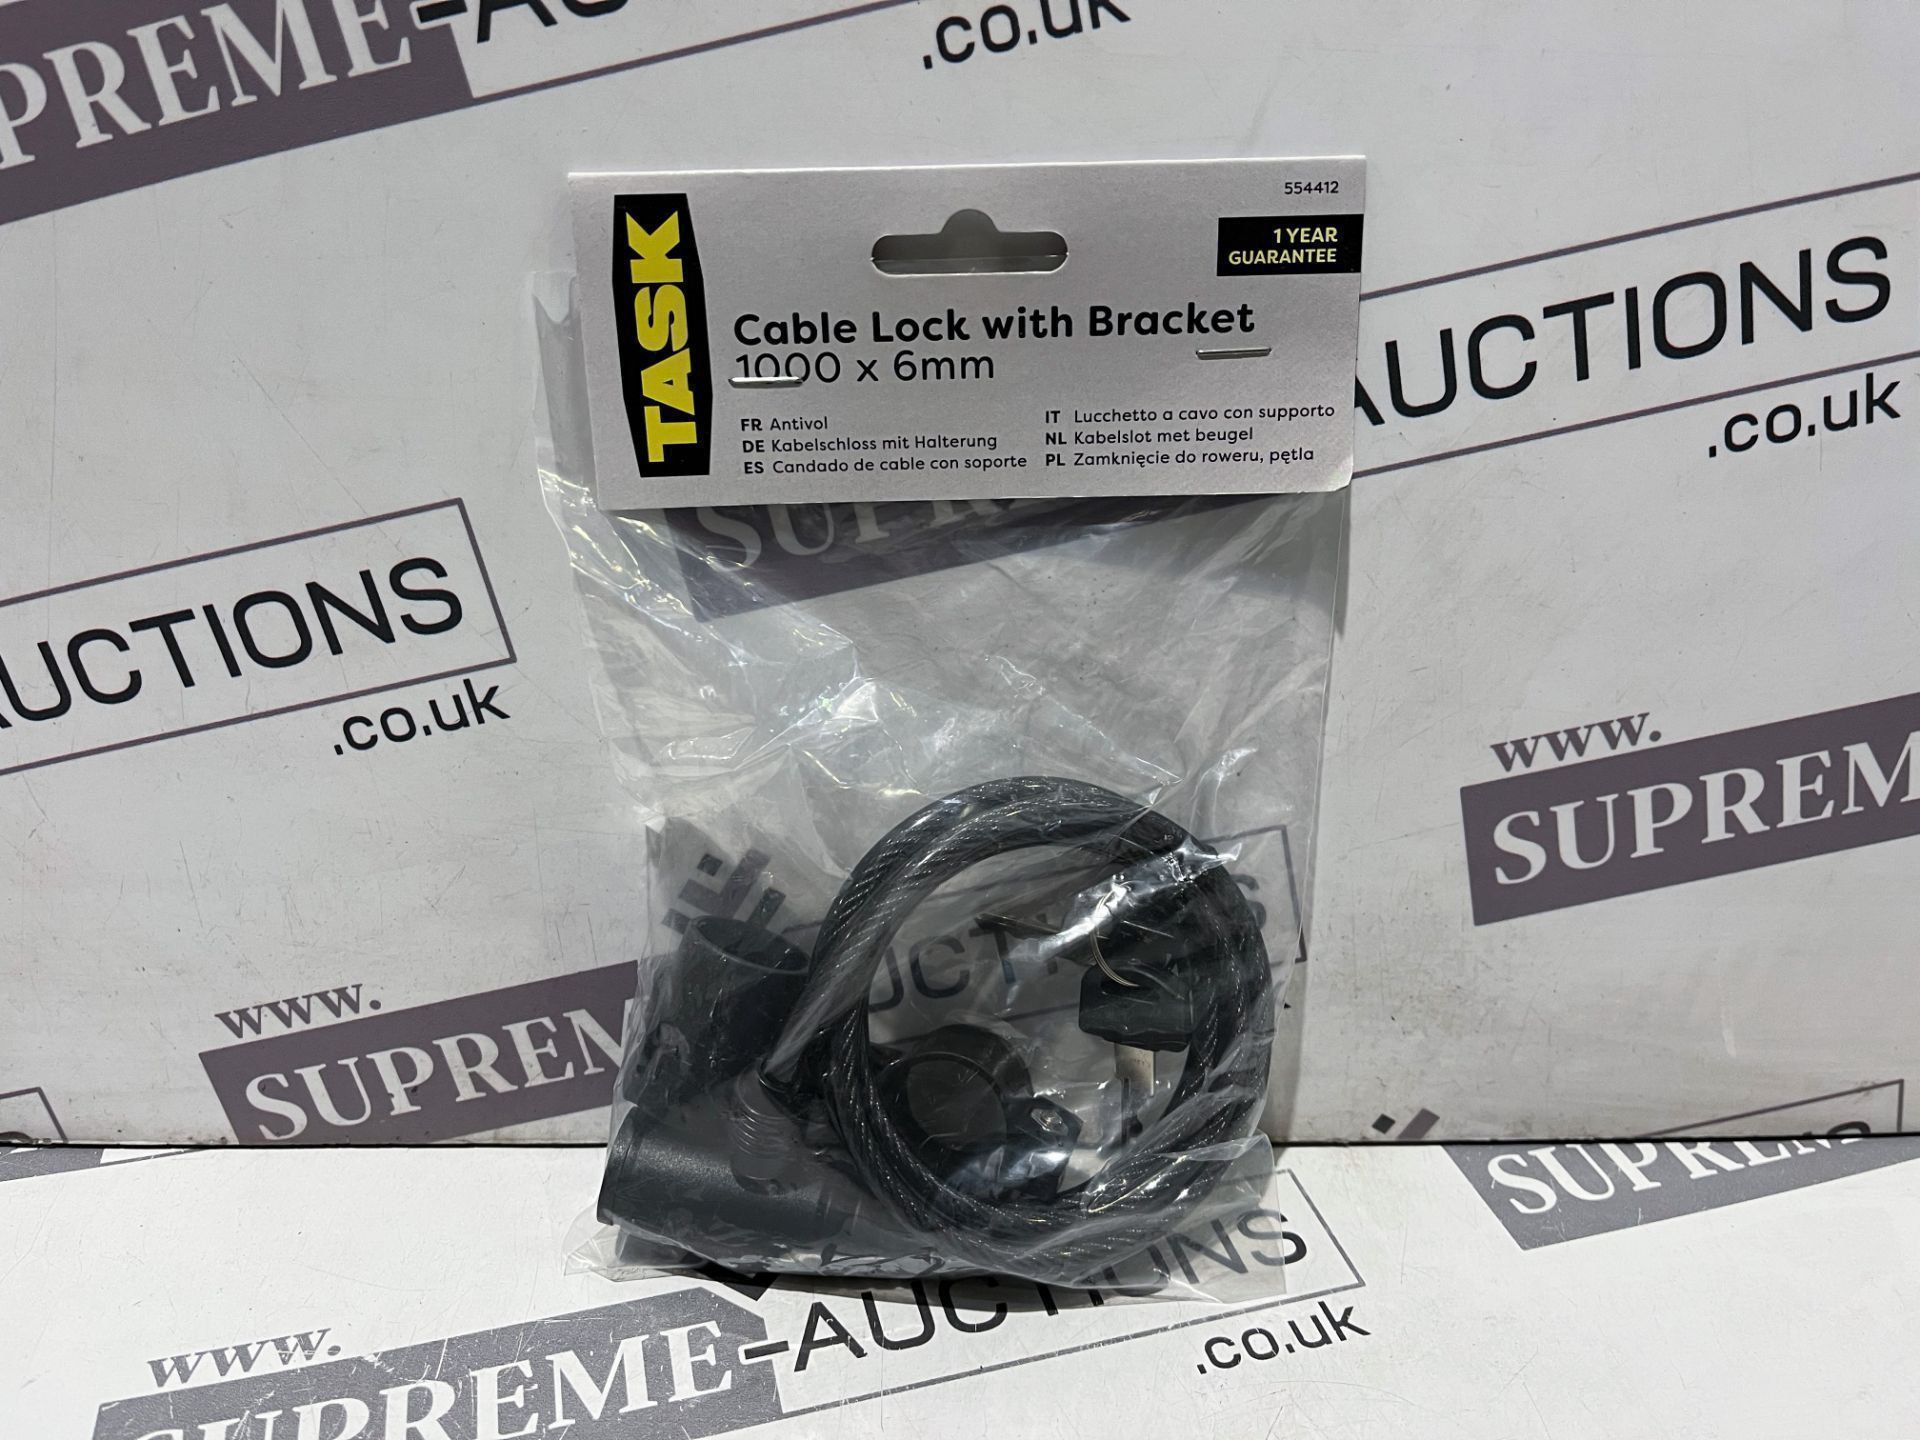 25 X BRAND NEW CABLE LOCKS WITH BRACKET 1000 X 6MM R6-6